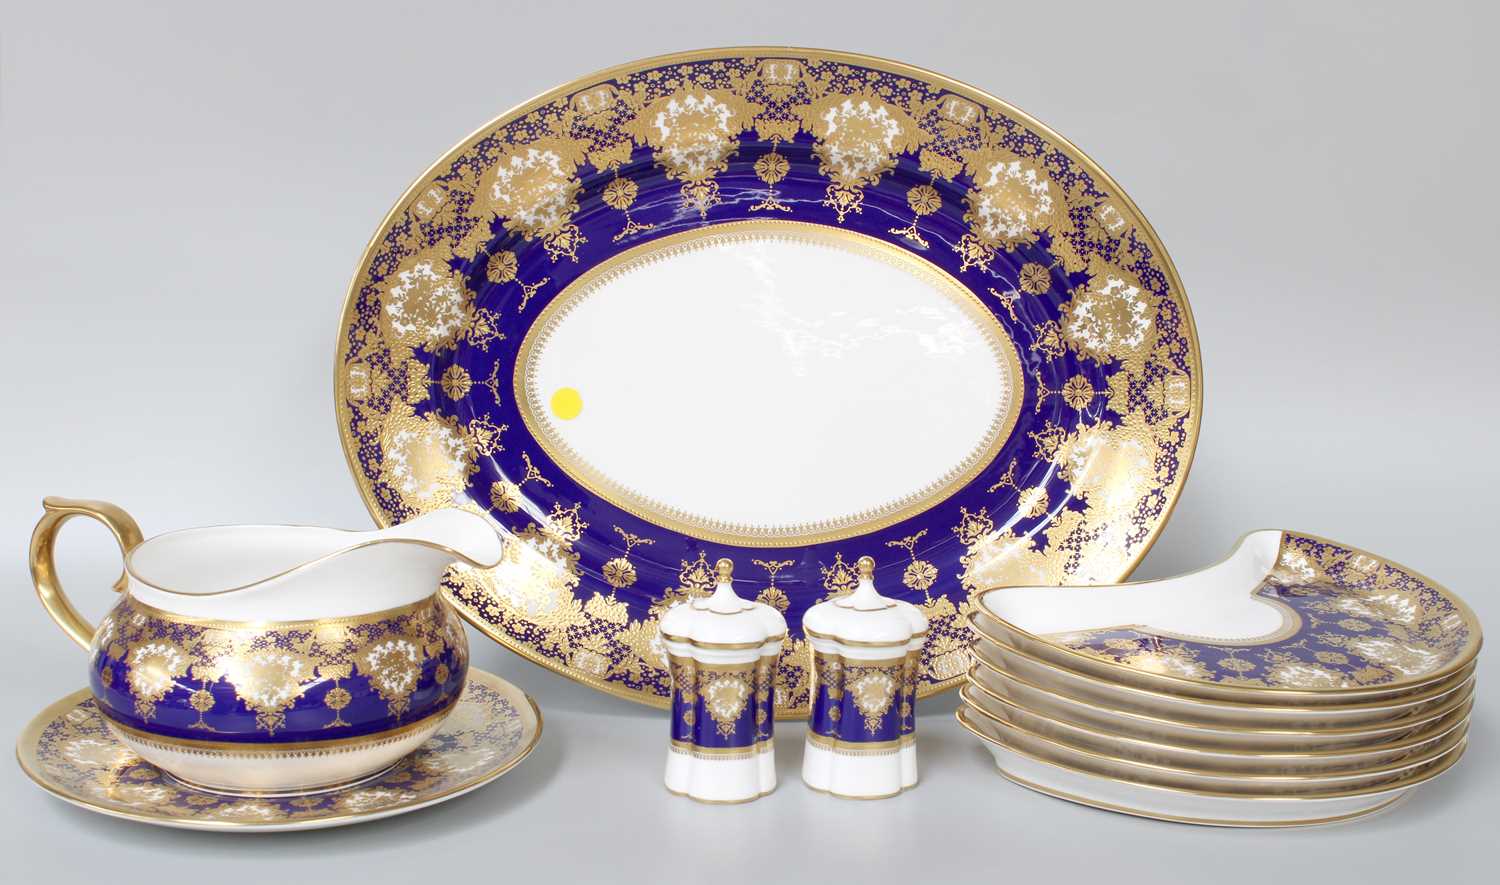 A Thomas Goode Marquis de Mos Pattern Dinner Service, with Thomas Goode booklet and purchase - Image 3 of 3